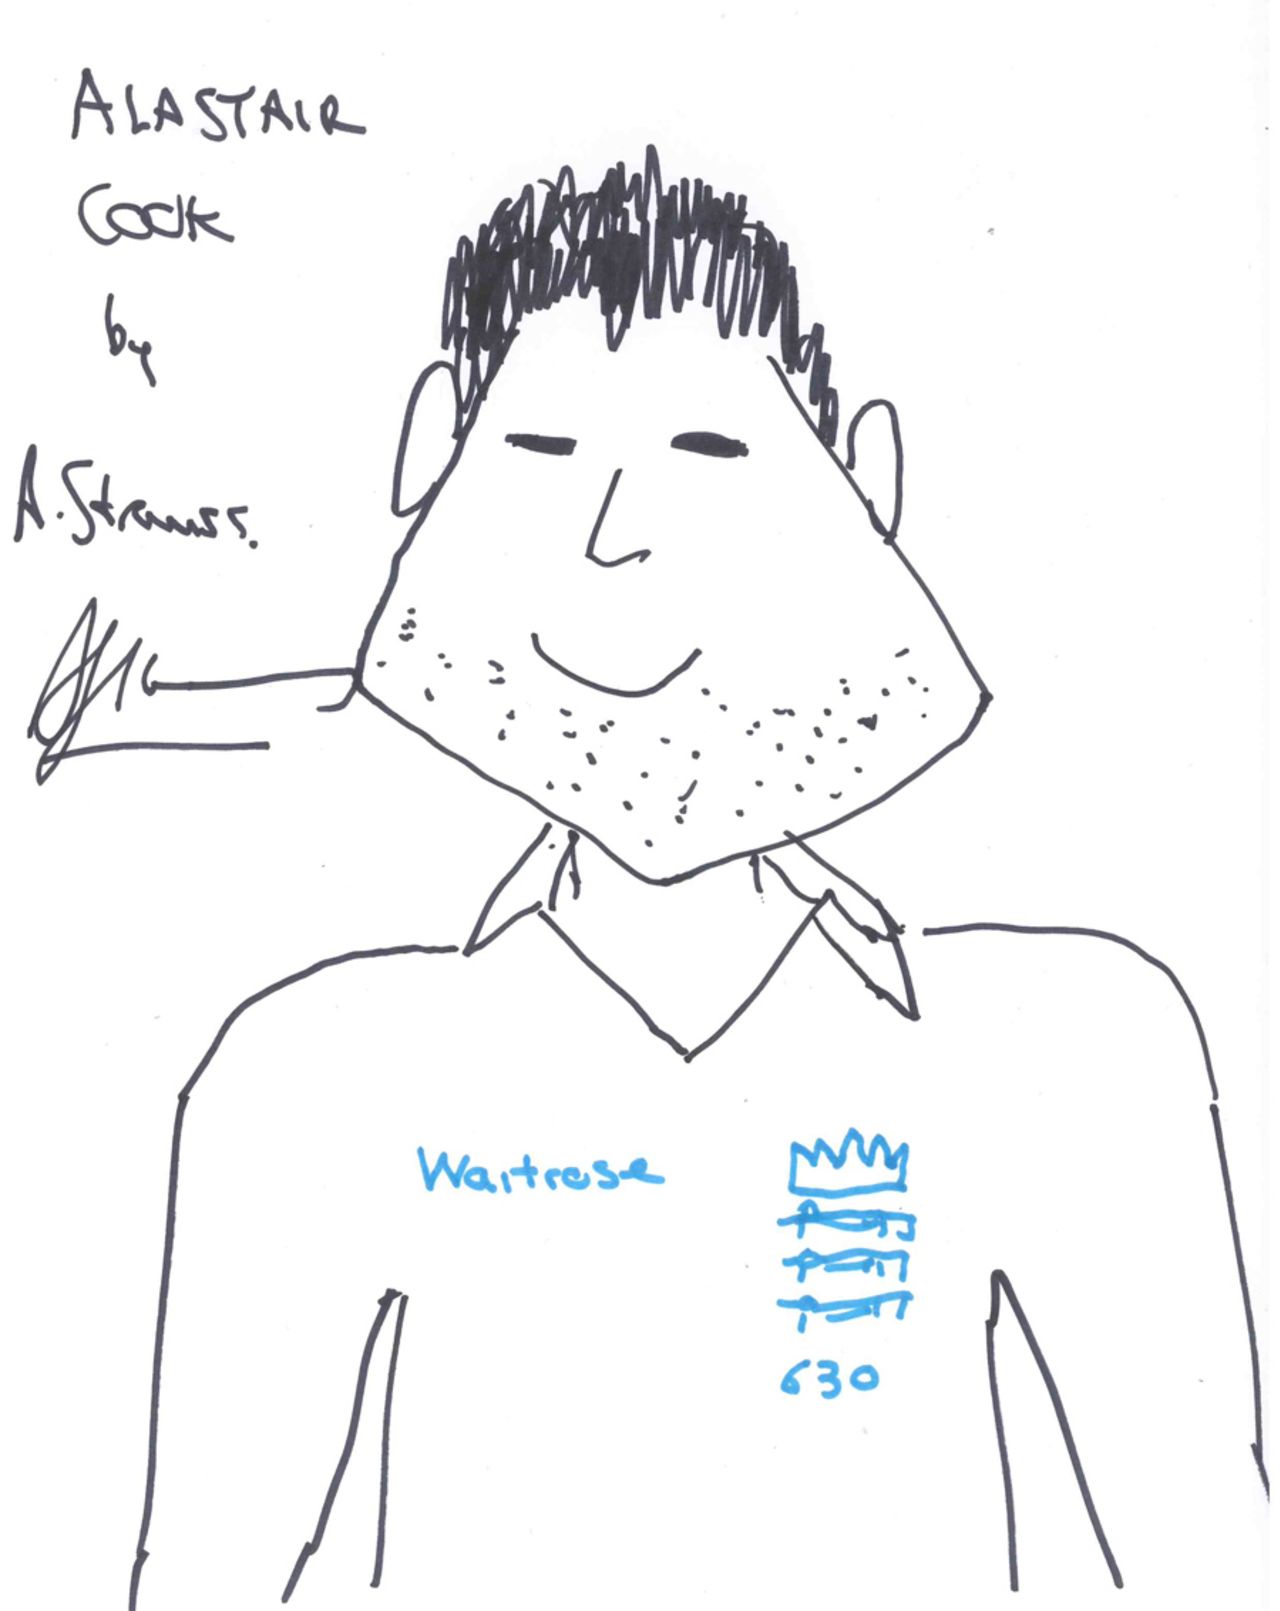 An Alastair Cook sketch by Andrew Strauss